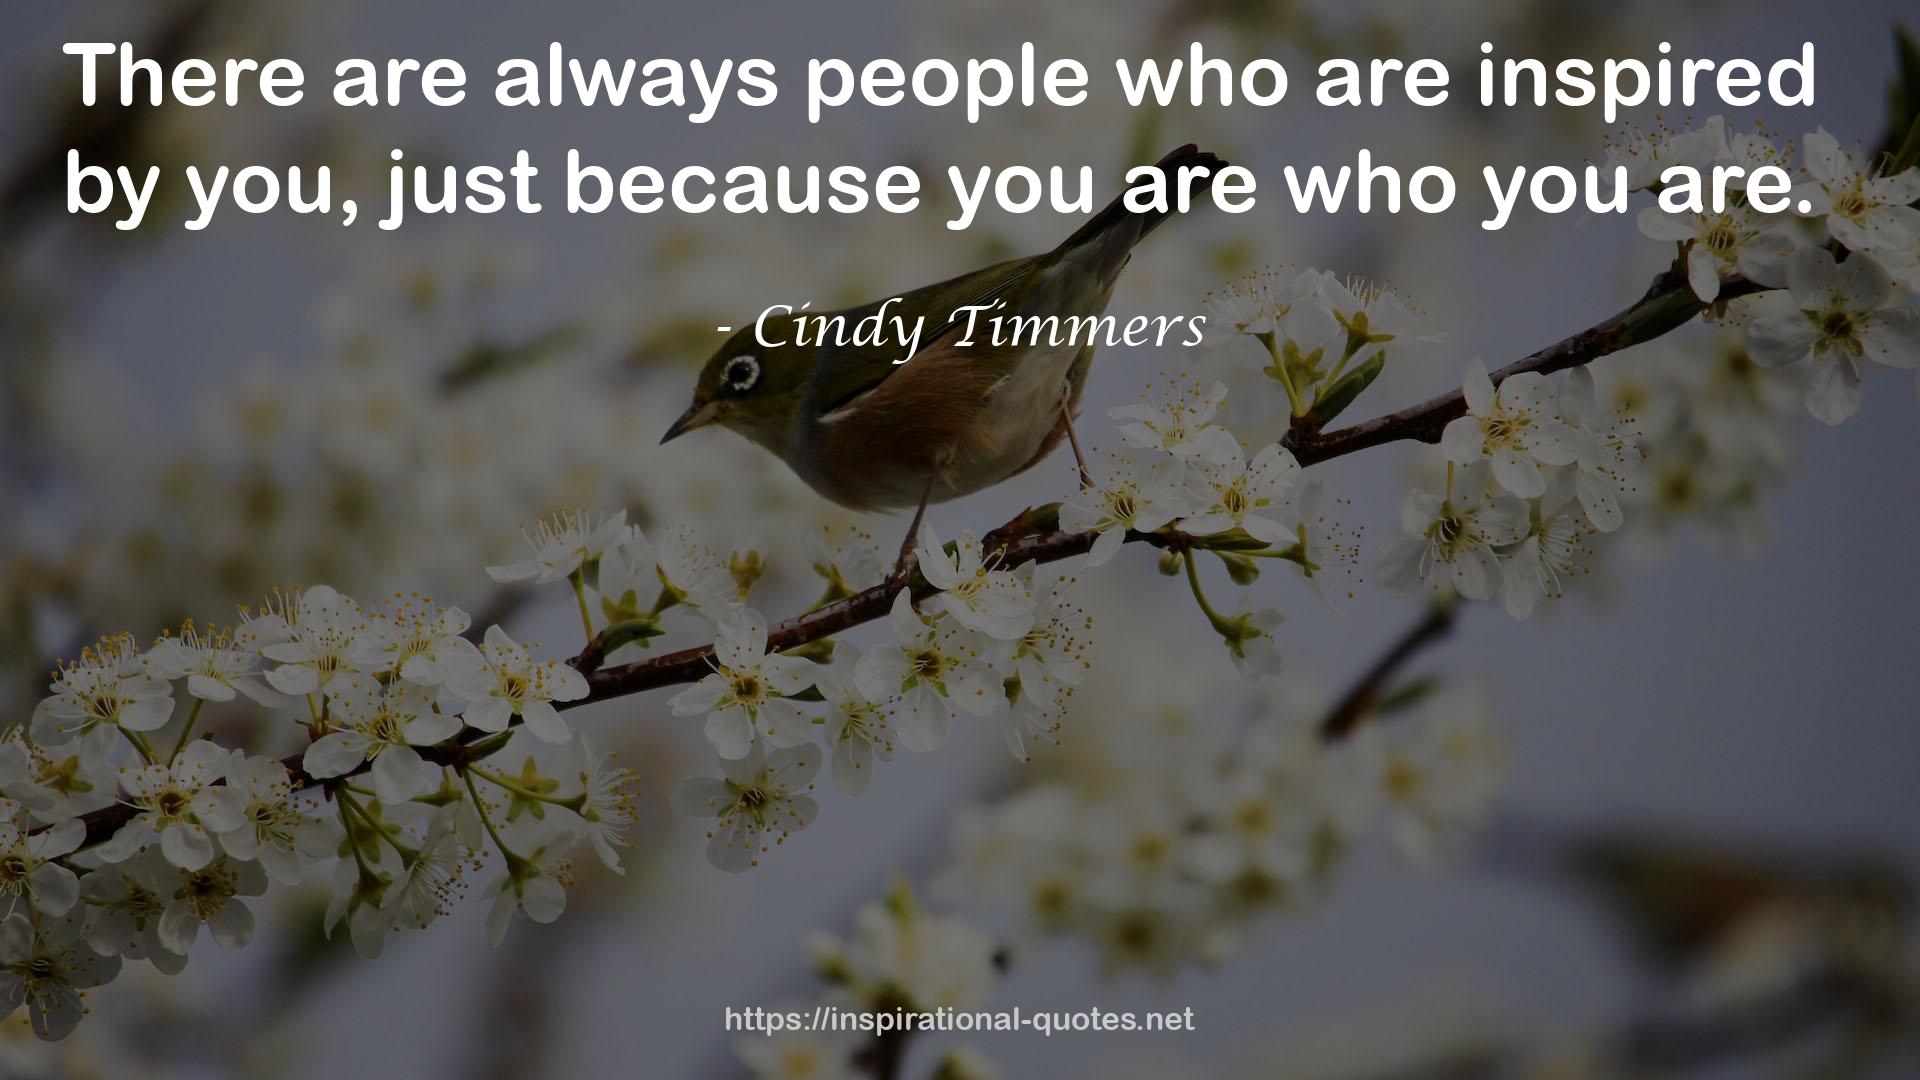 Cindy Timmers QUOTES